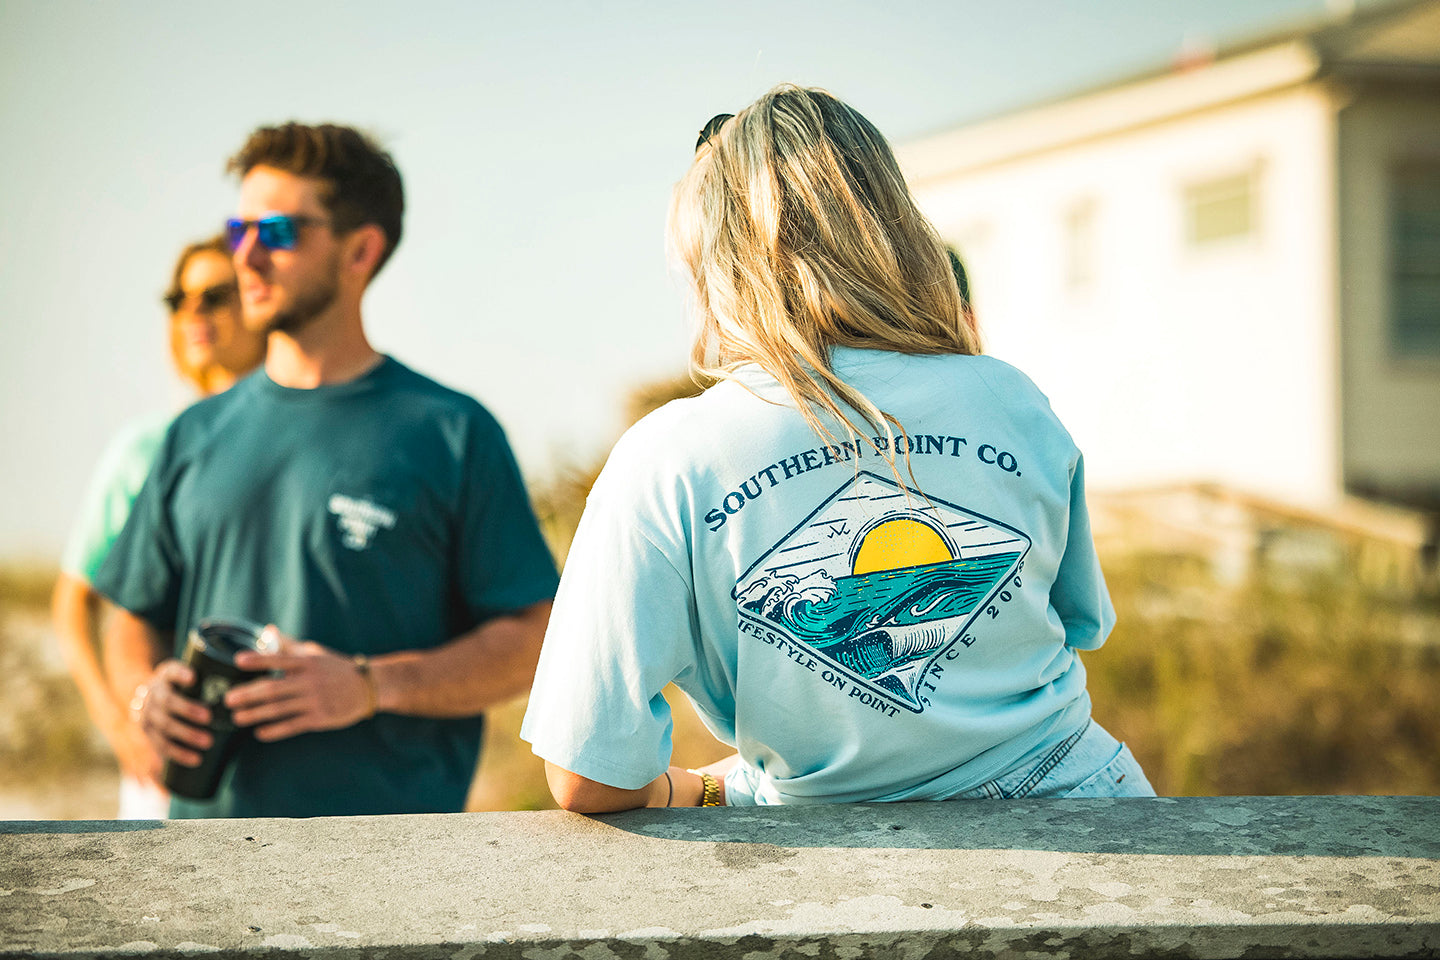 Couple on the beach in Southern Point Co tees